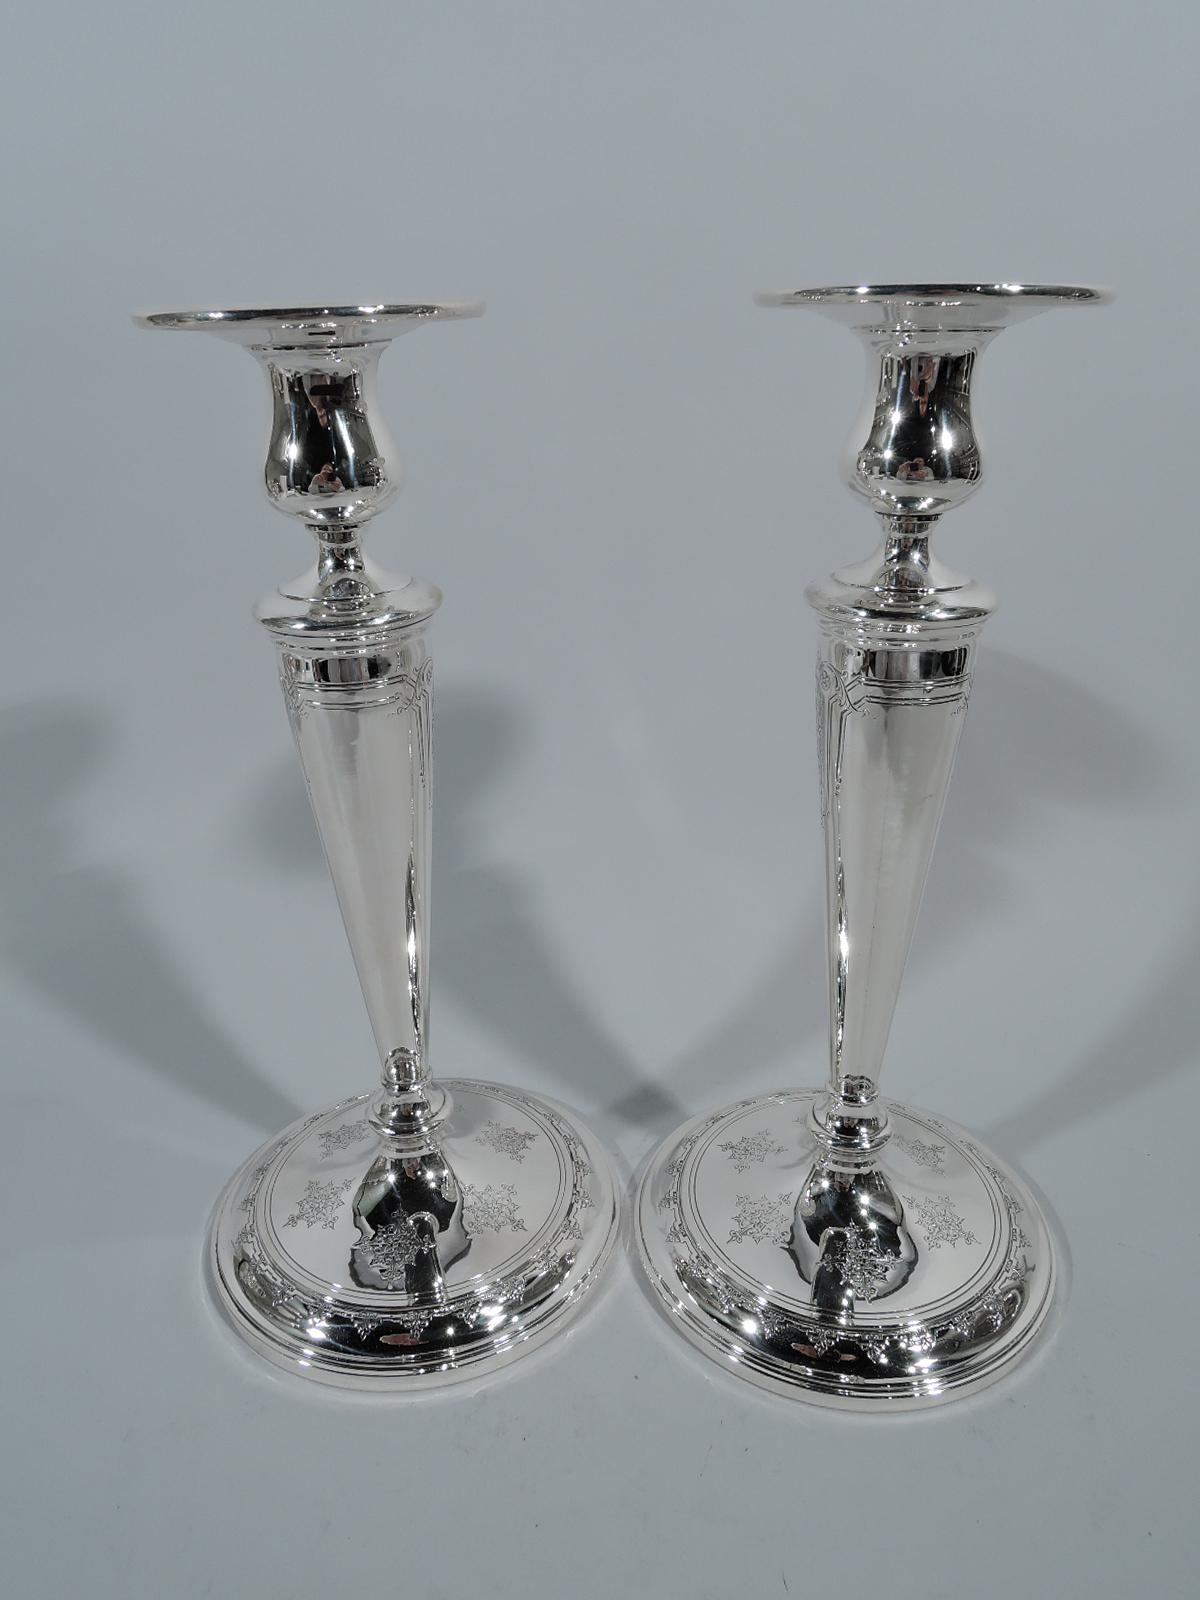 Pair of sterling silver candlesticks in Seville pattern. Made by Towle in Newburyport, Mass. Each: Straight and tapering shaft on raised foot. Bulbous socket with wide and molded rim. Ornament includes pendant garlands in curvilinear frames and